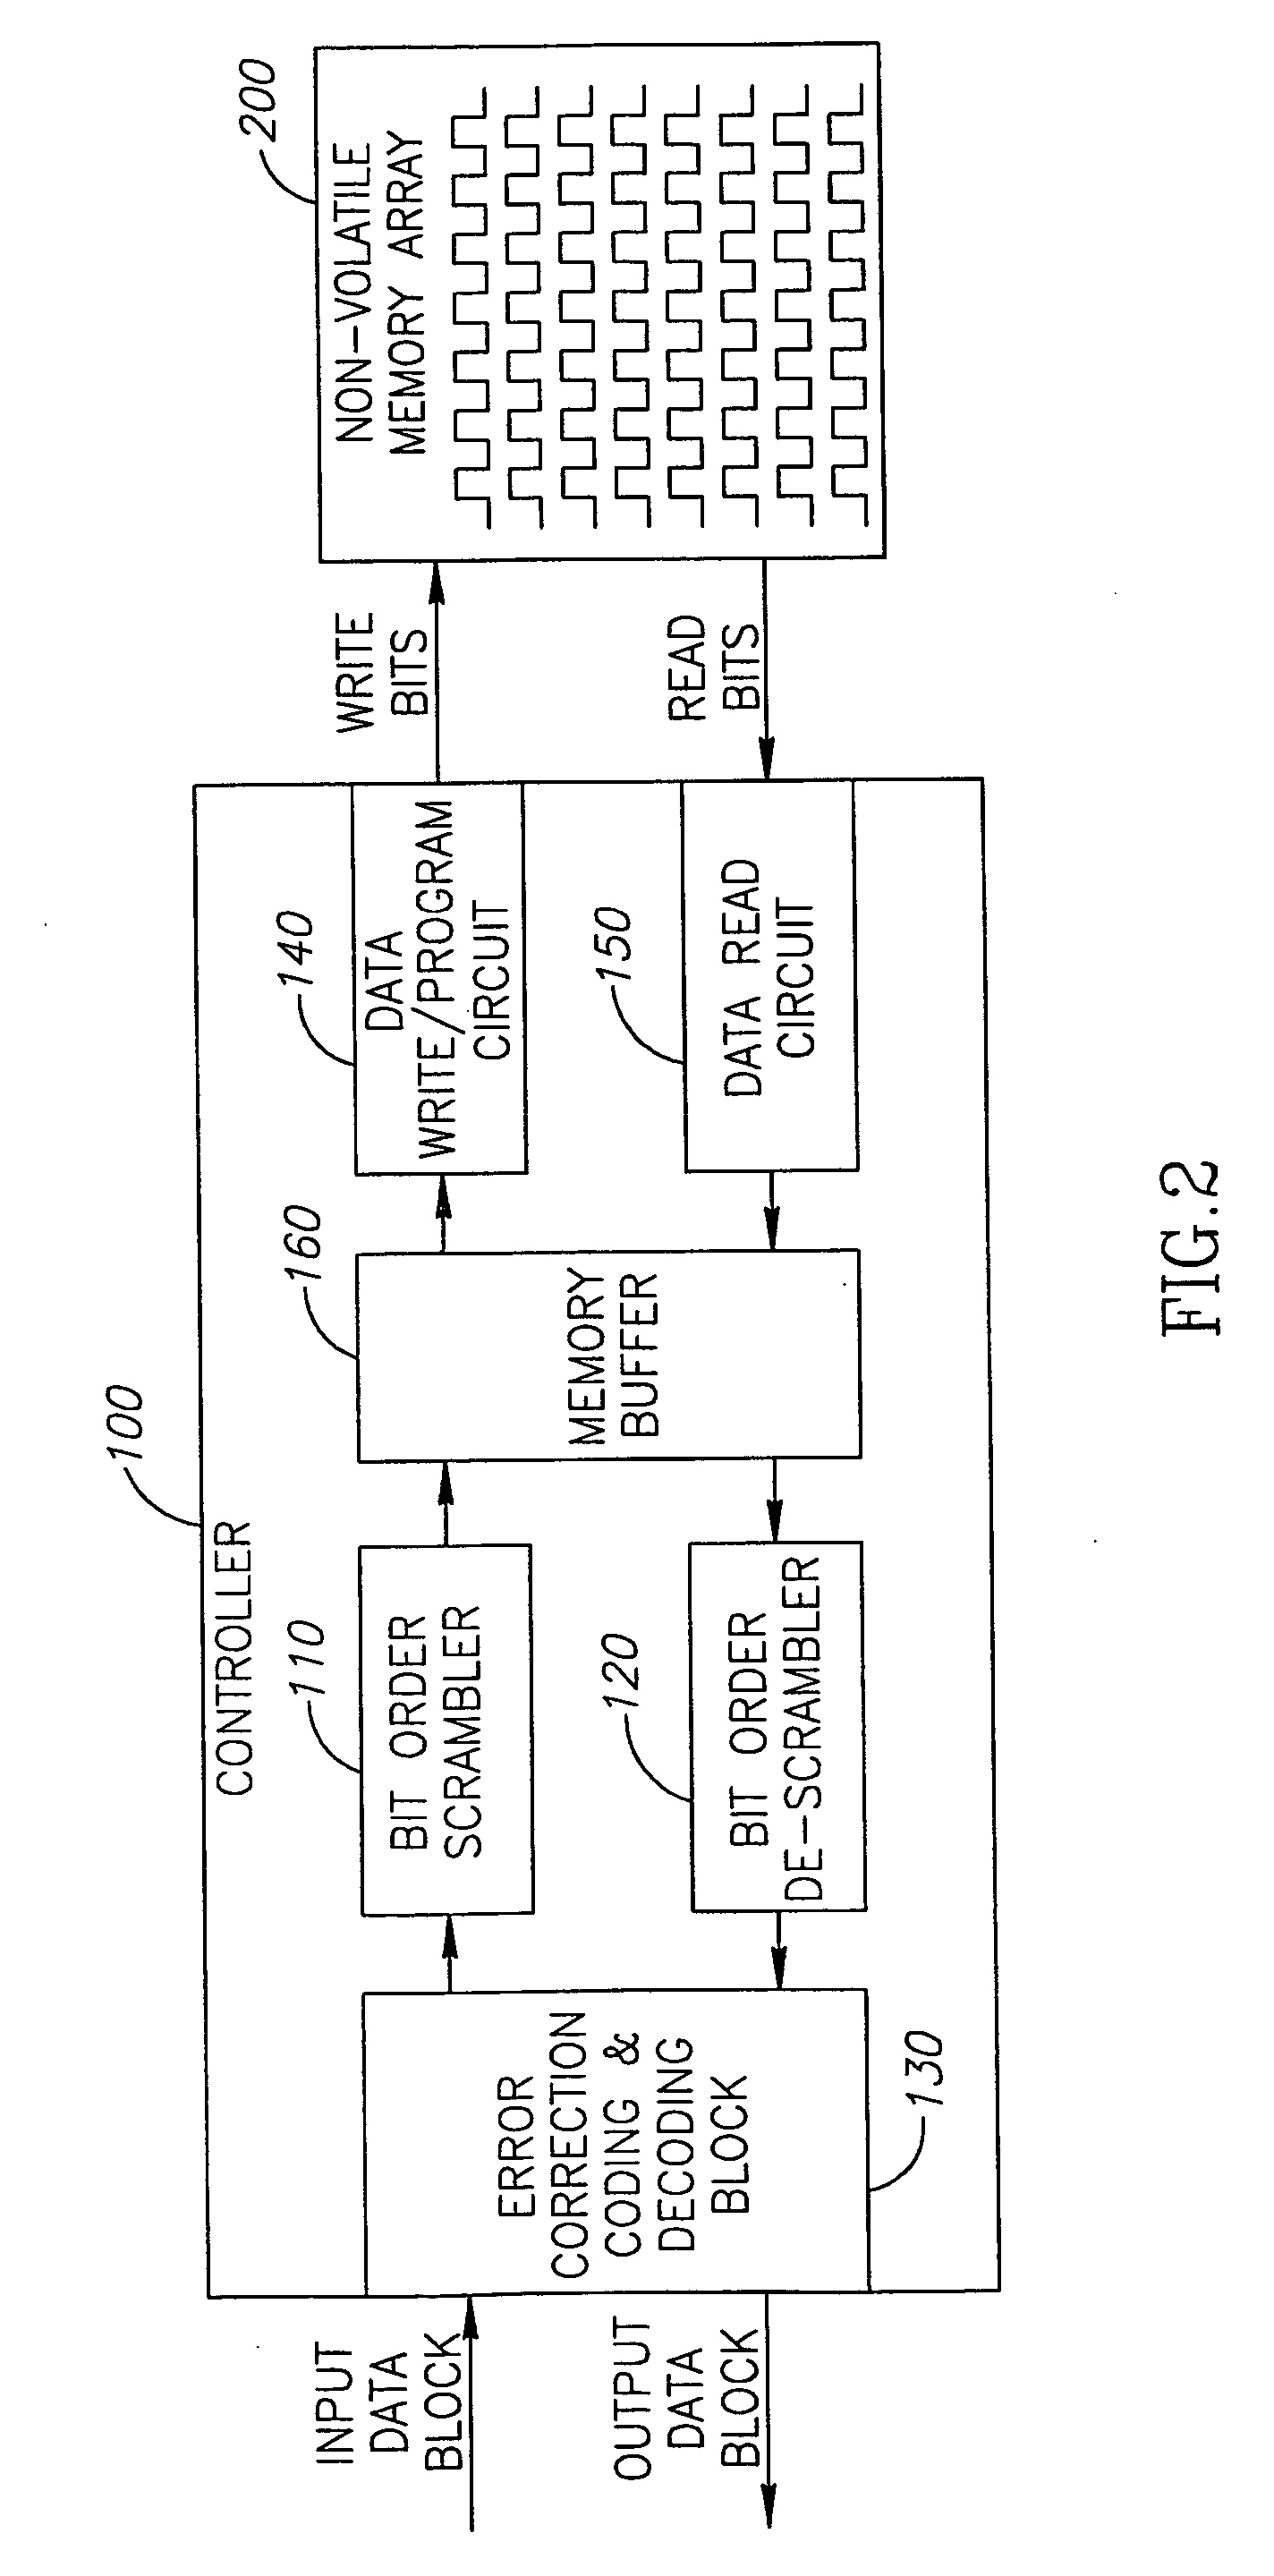 Circuit, system and method for encoding data to be stored on a non-volatile memory array